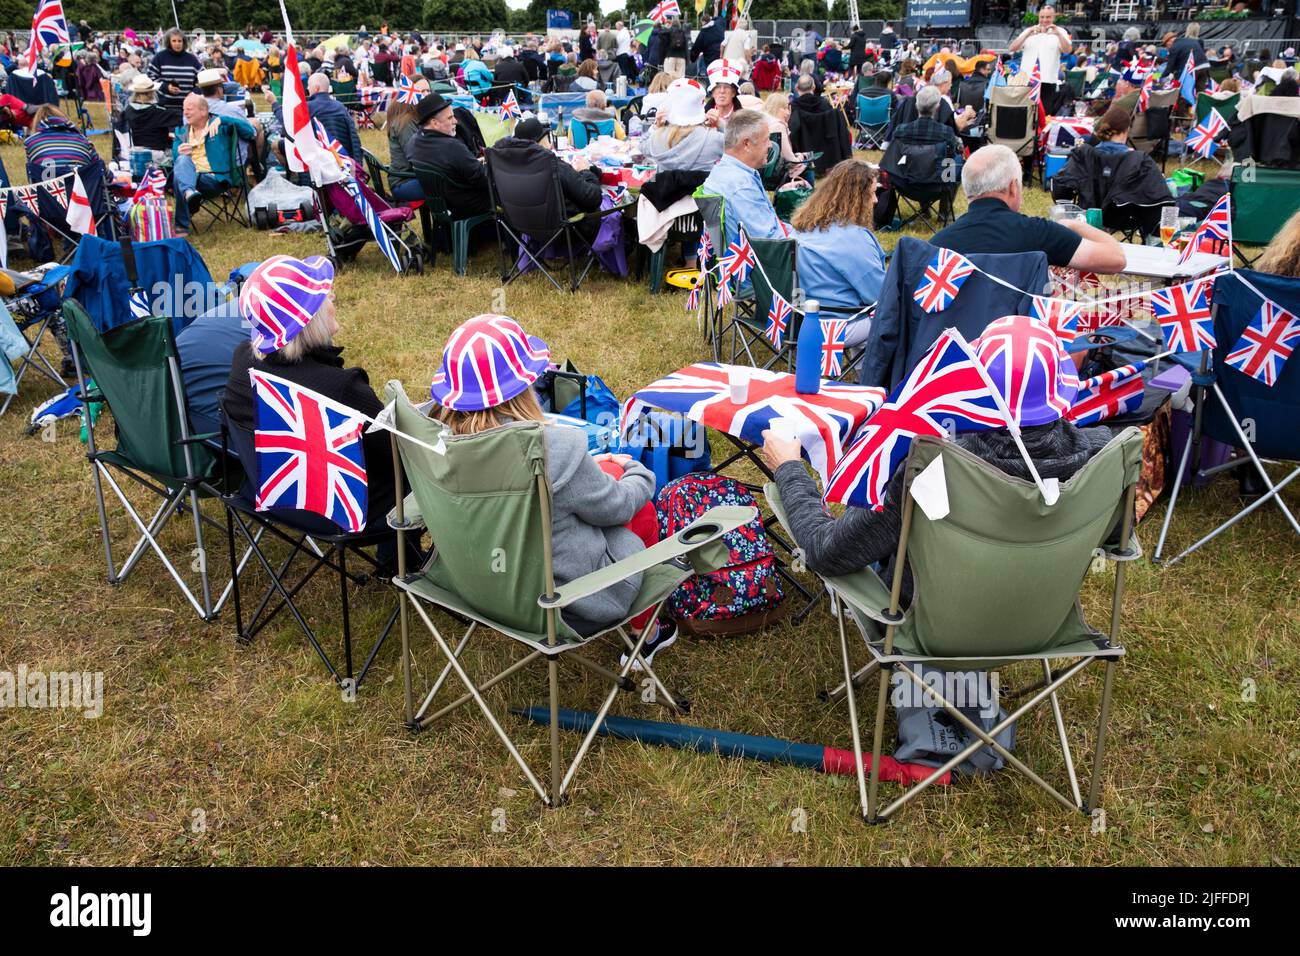 Woodstock, Oxfordshire, UK. 2nd July 2022. Audience seated in camping chairs with Untion Jack bowler hats. Battle Prom Picnic Concerts. Blenheim Palace. United Kingdom. Credit: Alexander Caminada/Alamy Live News Stock Photo